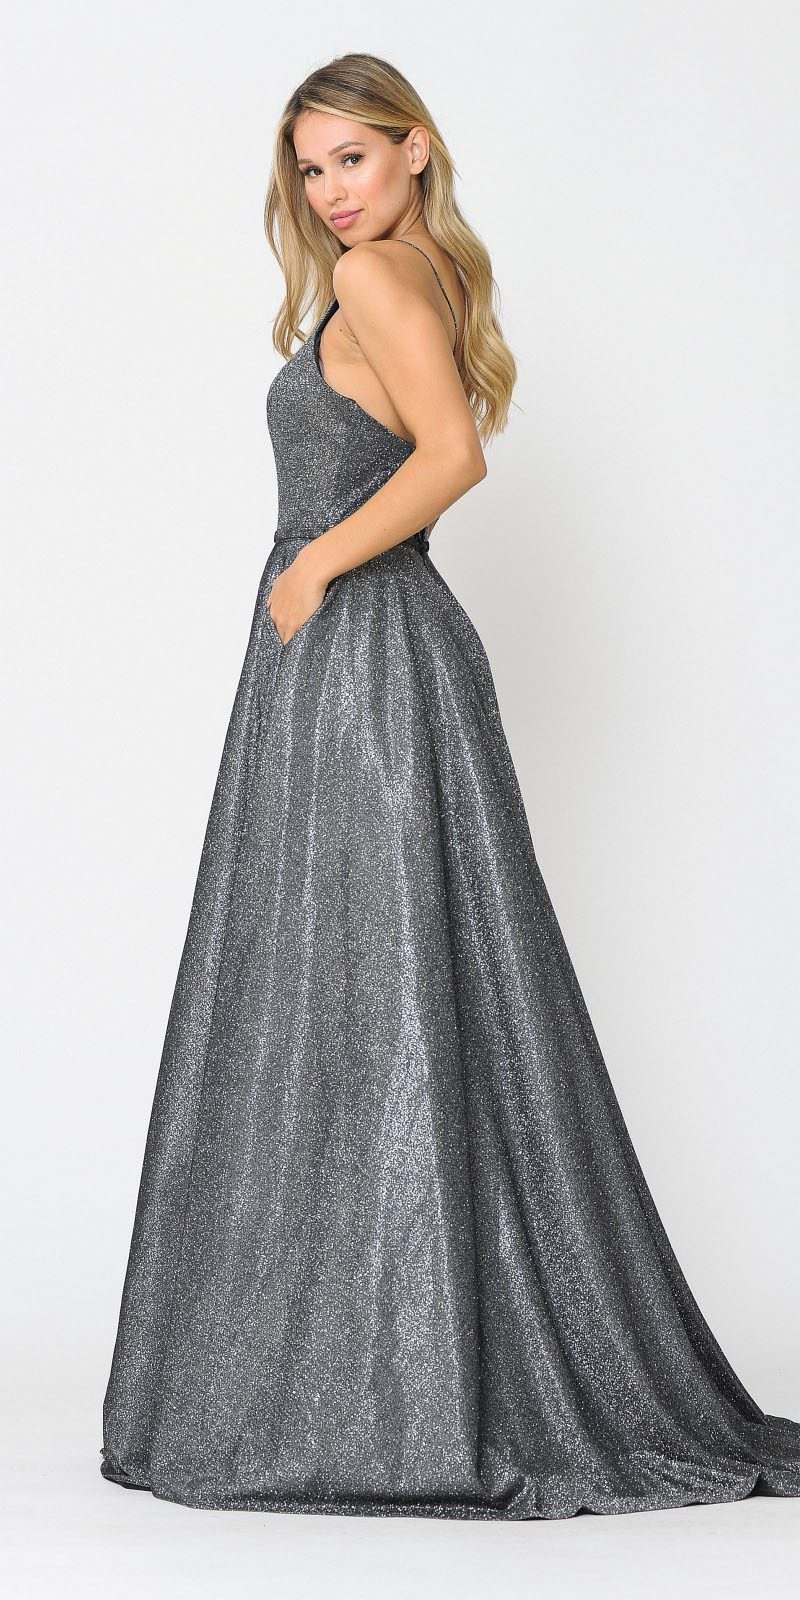 Black/Silver Long Prom Dress with Criss-Cross Back and Pockets